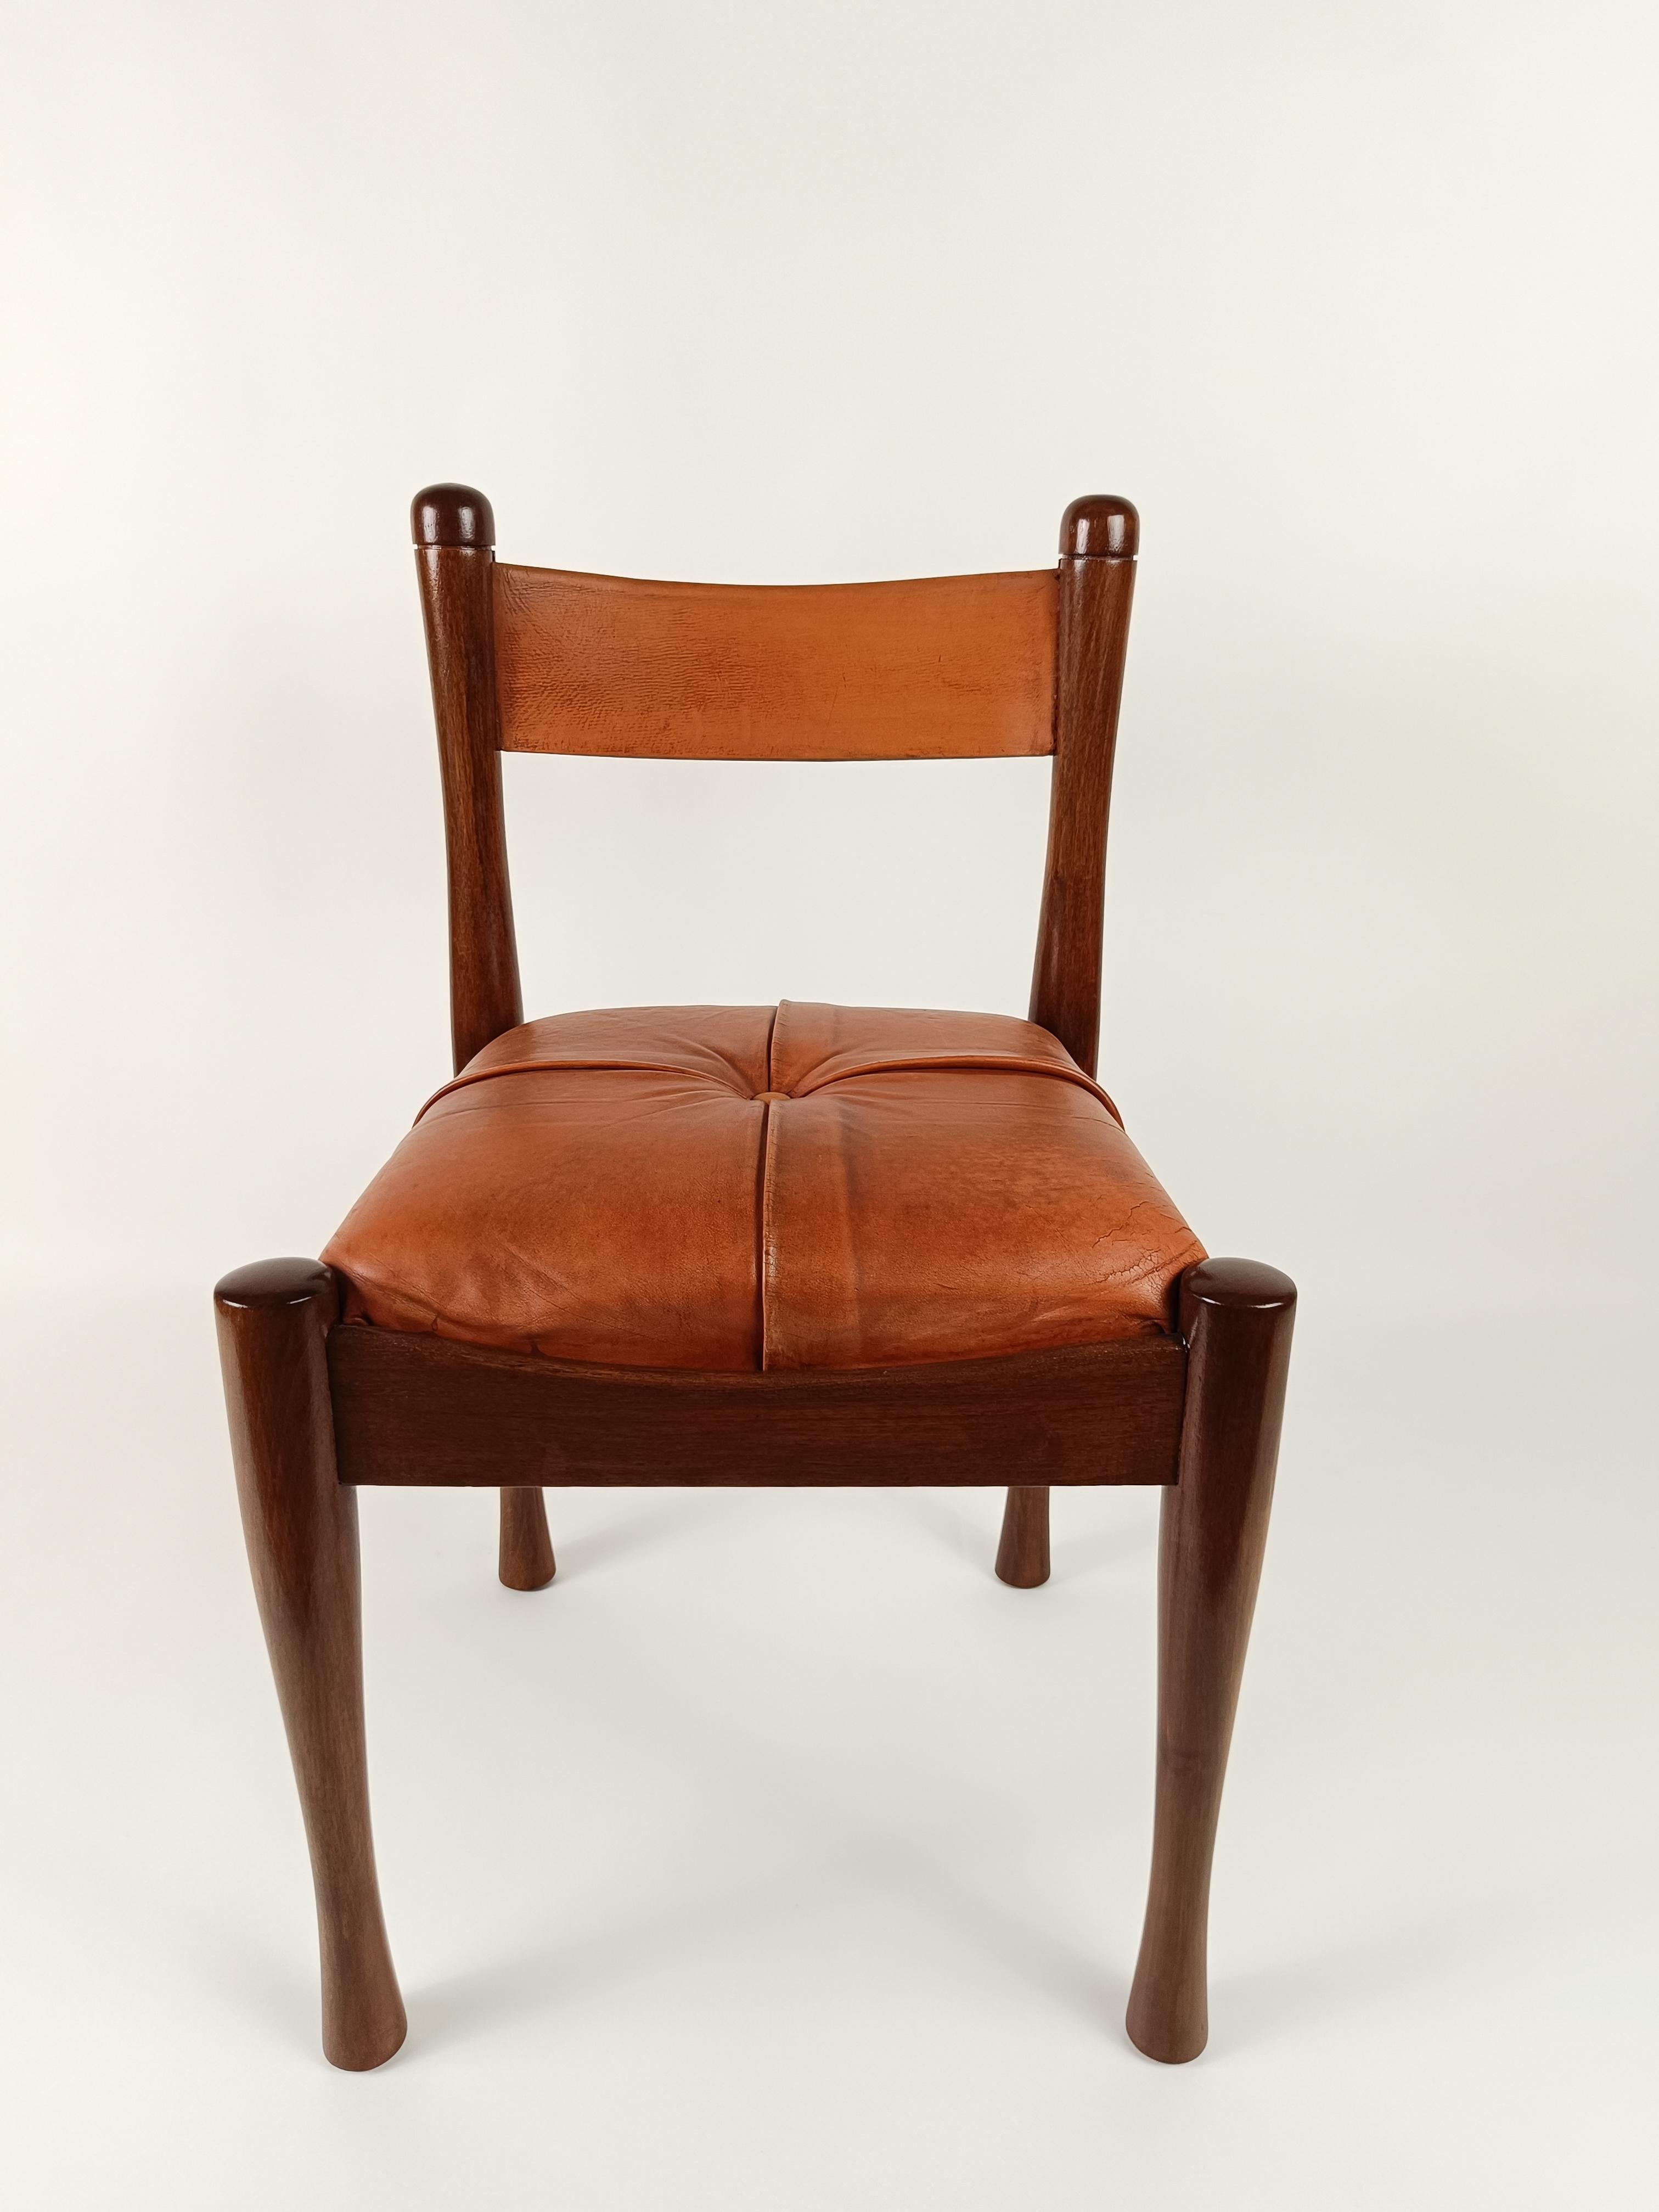 A set of 4 Italian Chairs in Wood and Cognac Leather by S. Coppola for Bernini  For Sale 7